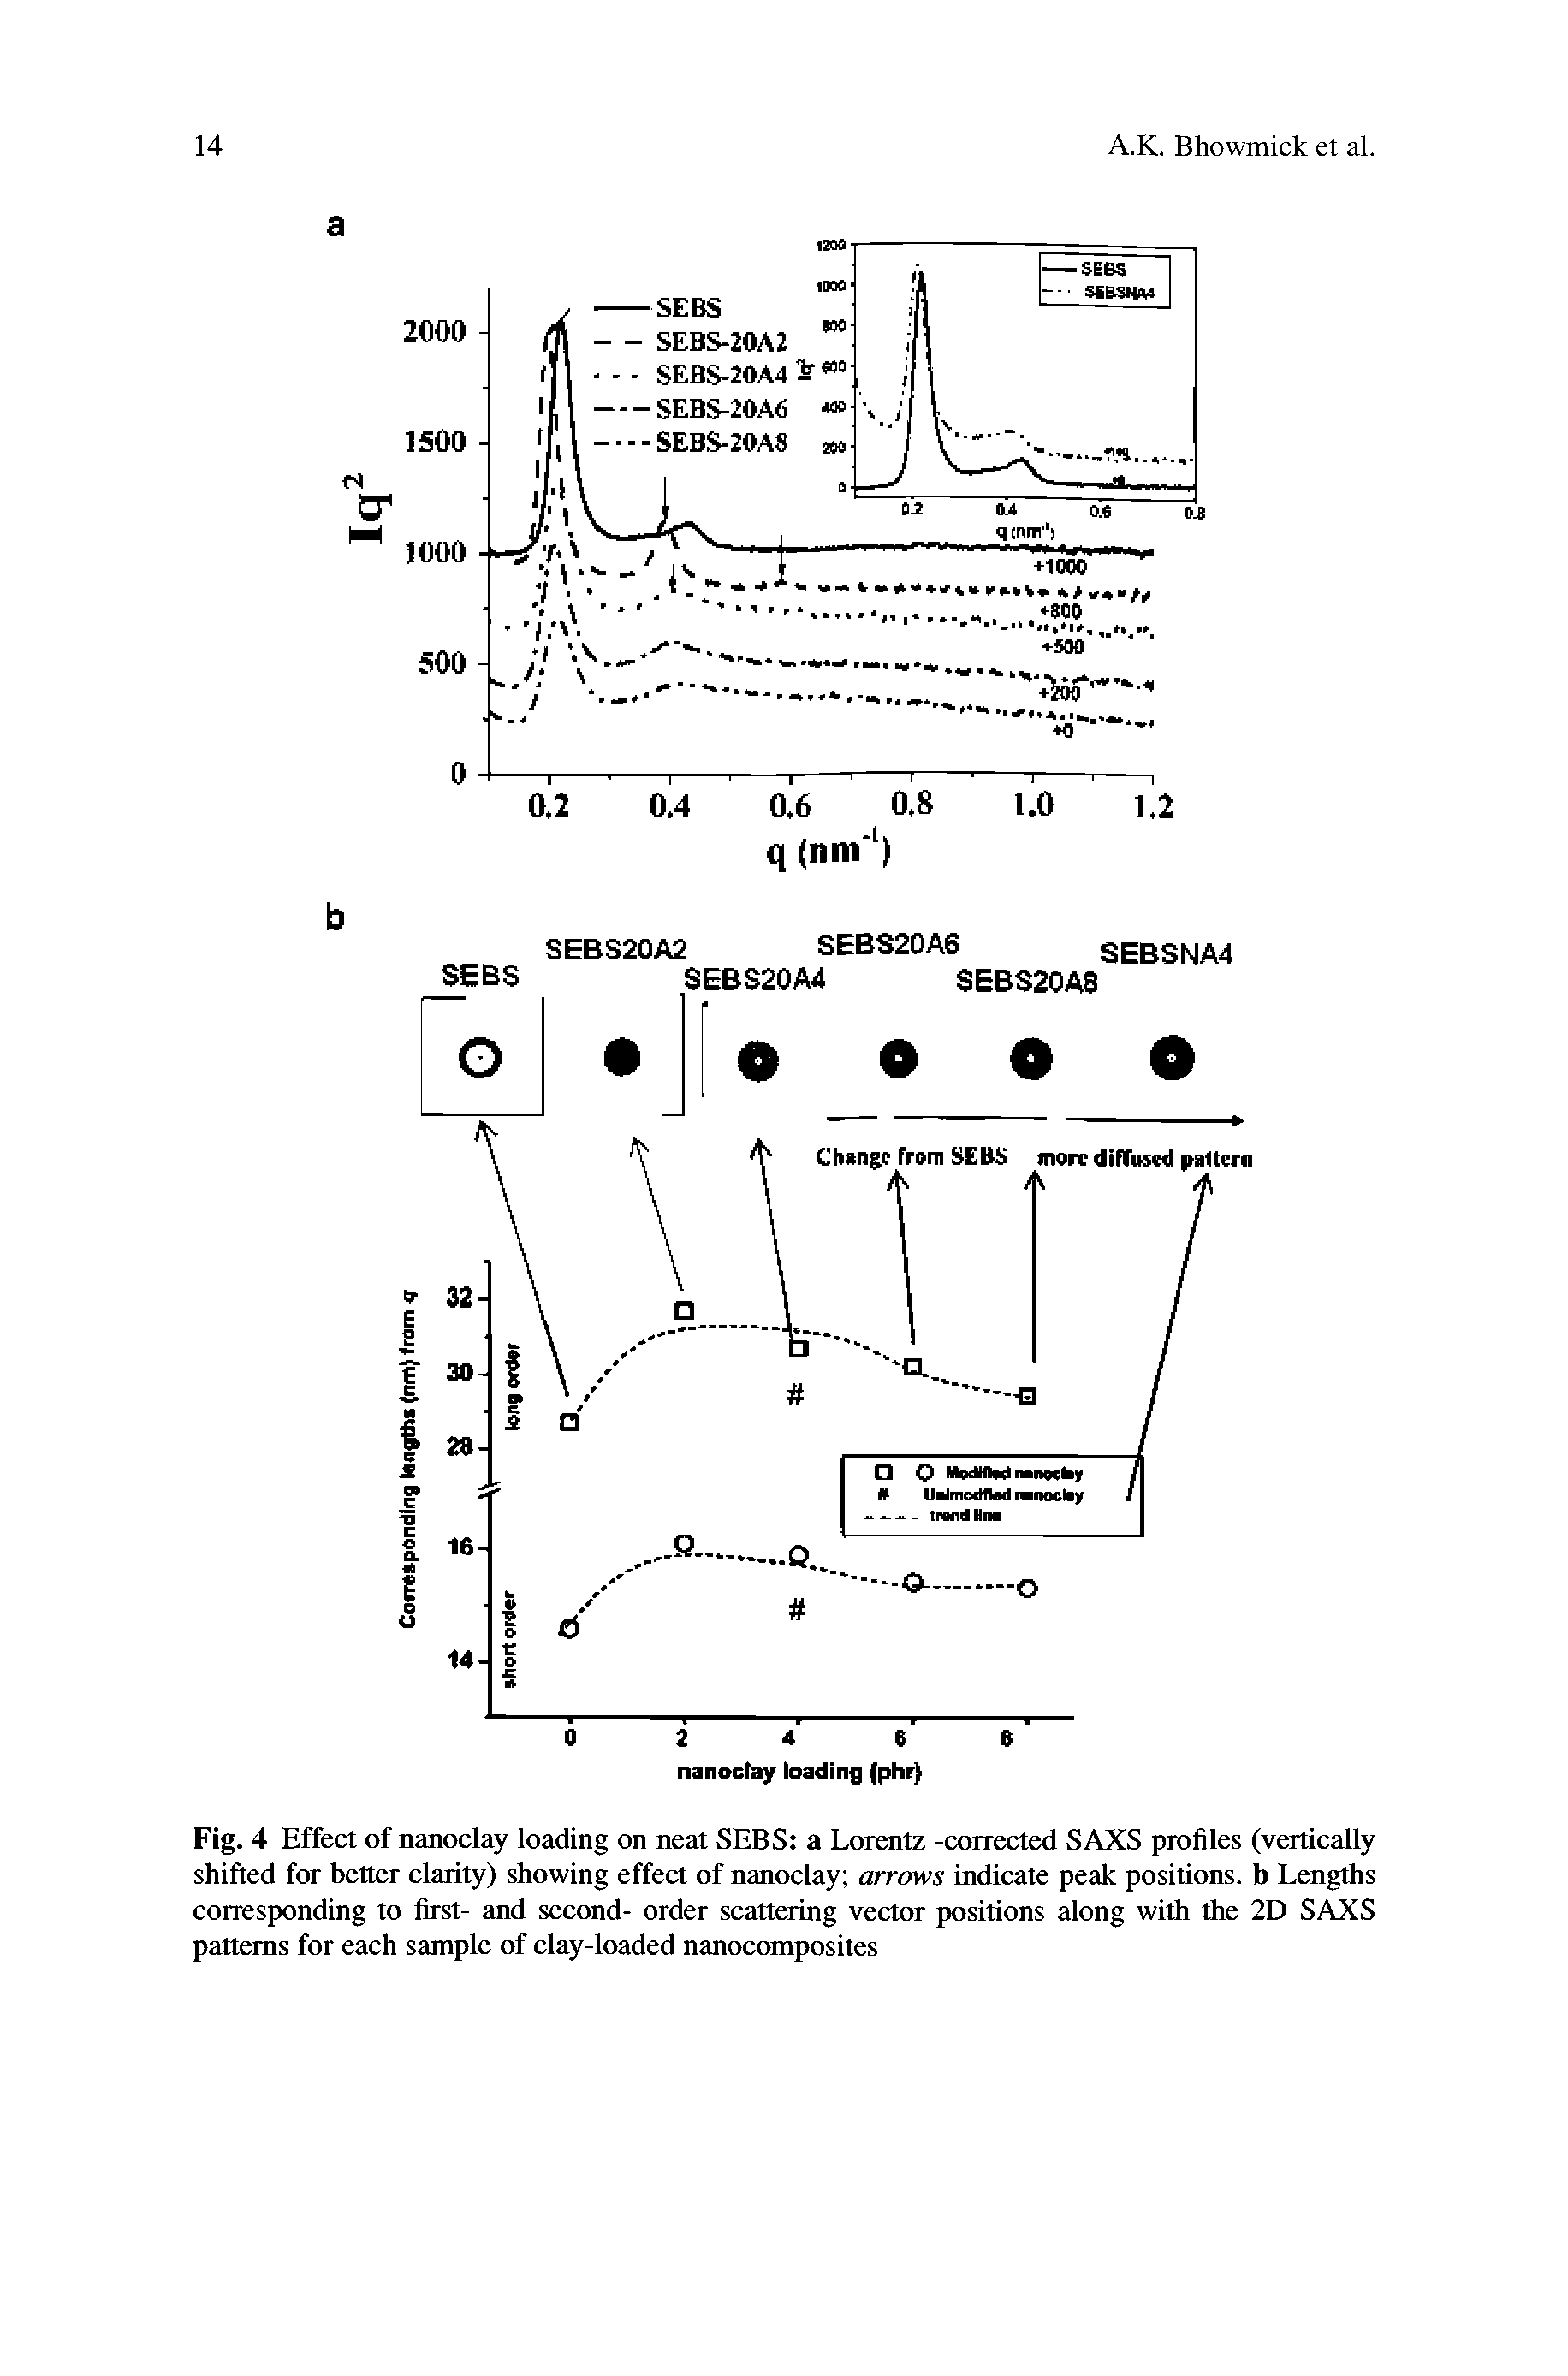 Fig. 4 Effect of nanoclay loading on neat SEBS a Lorentz -corrected SAXS profiles (vertically shifted for better clarity) showing effect of nanoclay arrows indicate peak positions, b Lengths corresponding to first- and second- order scattering vector positions along with the 2D SAXS patterns for each sample of clay-loaded nanocomposites...